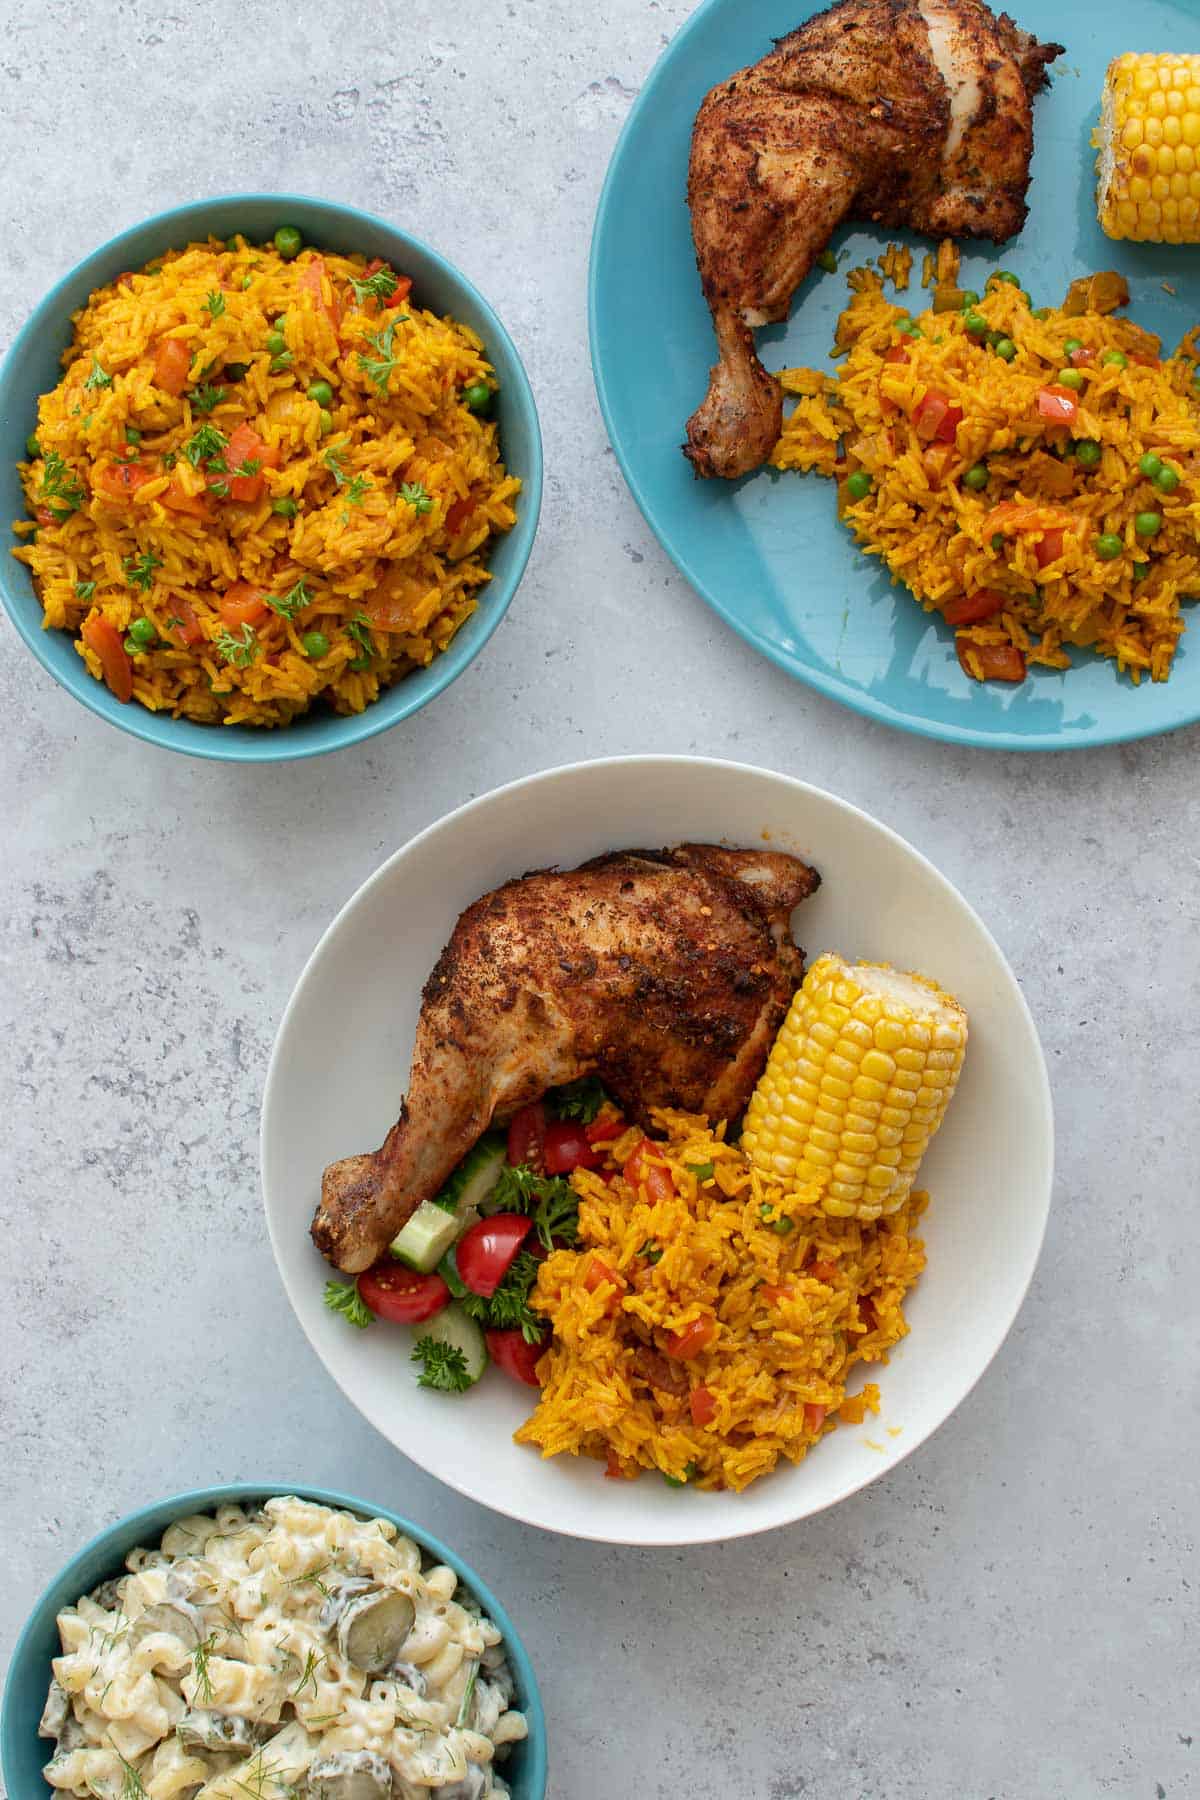 Homemade Nandos with spicy rice, peri peri chicken and corn on the cob.